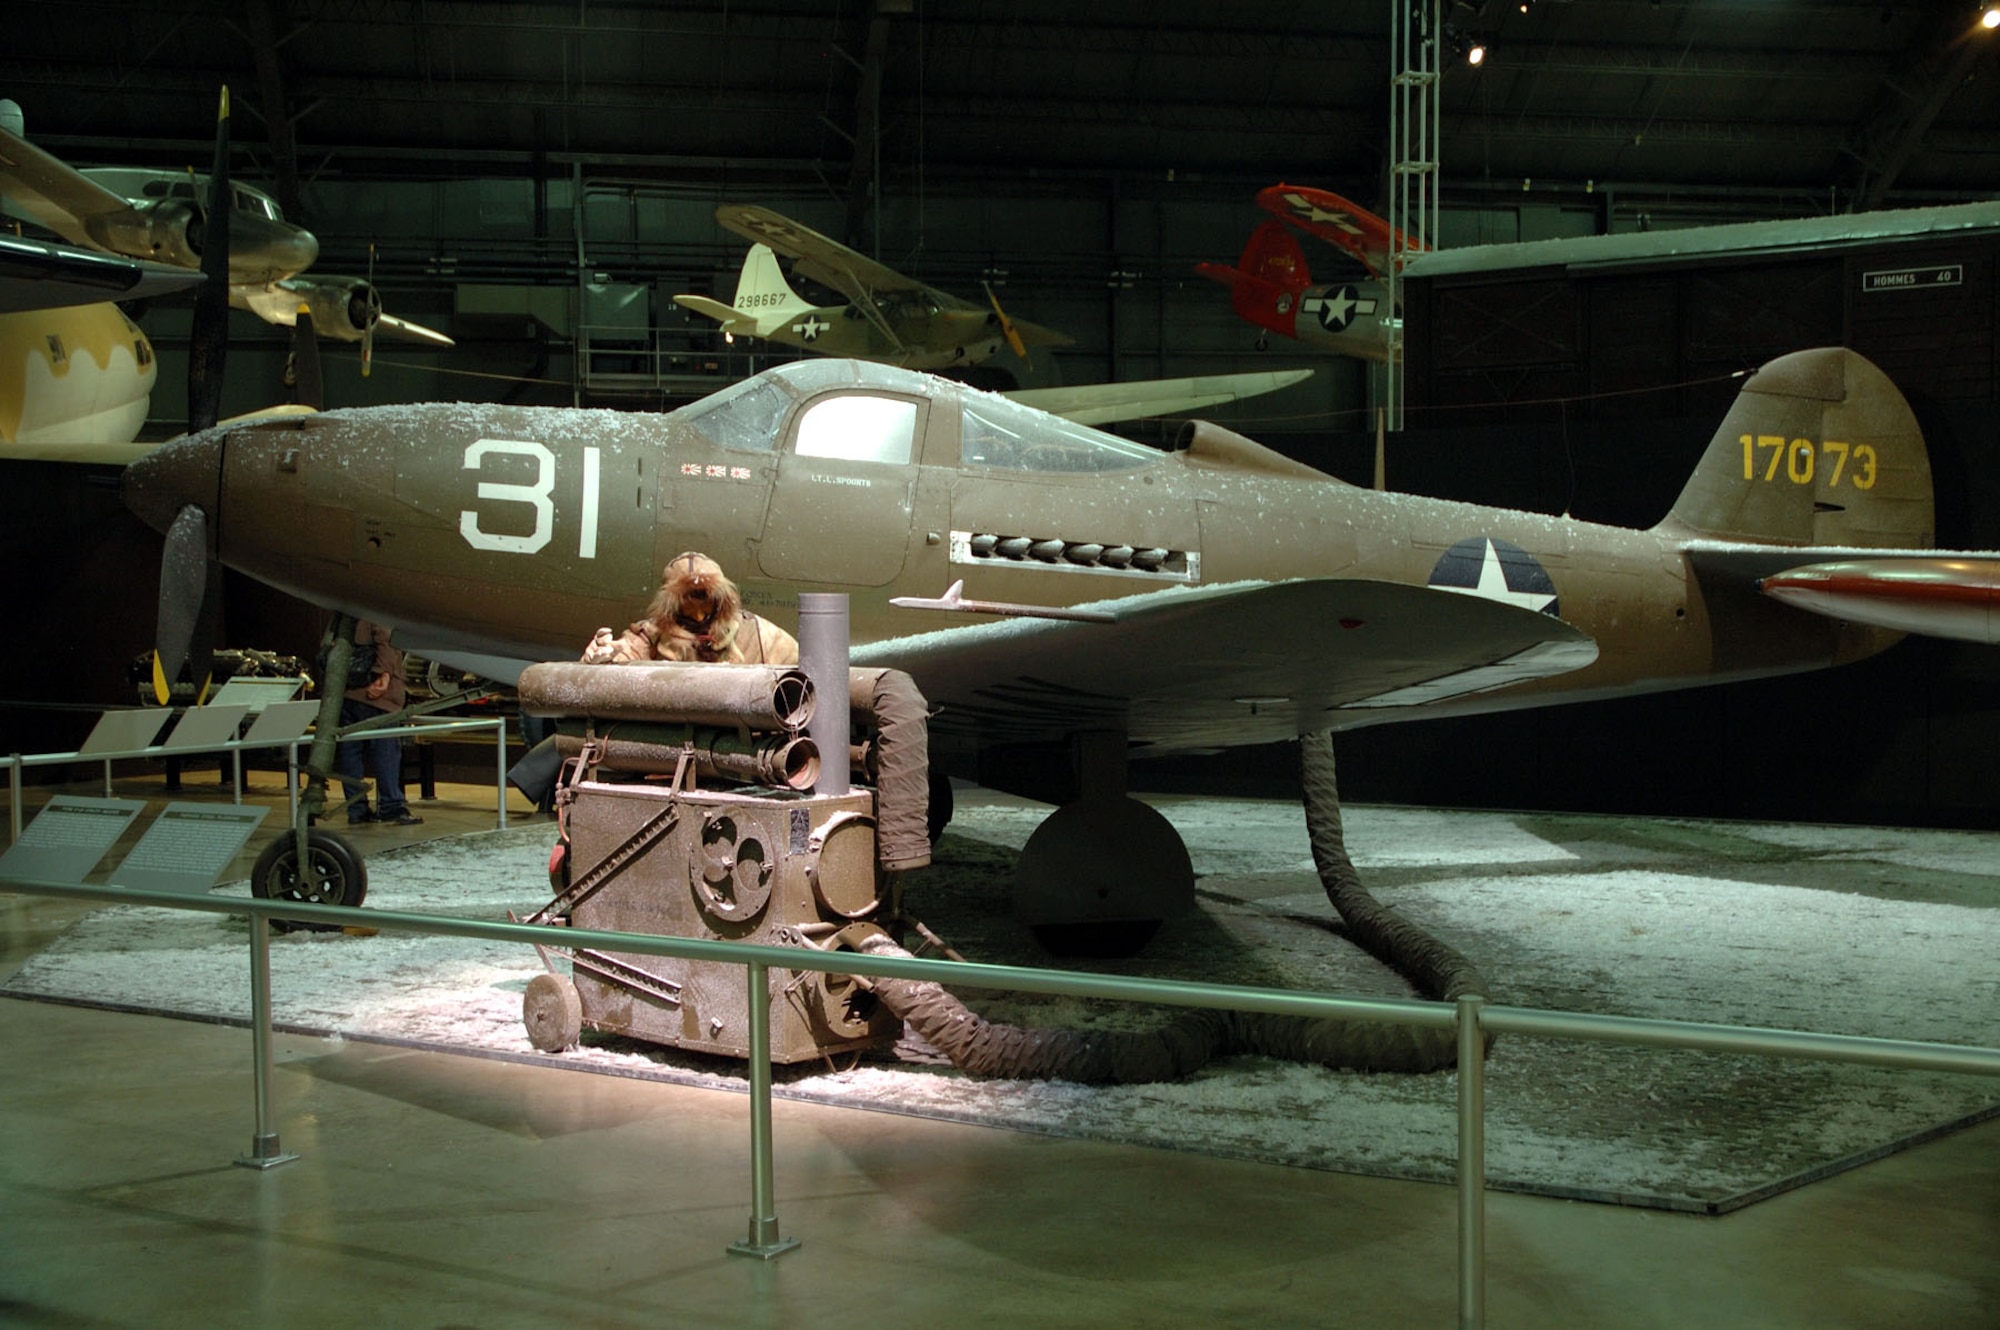 DAYTON, Ohio -- Bell P-39Q Airacobra in the World War II Gallery at the National Museum of the United States Air Force. (U.S. Air Force photo)